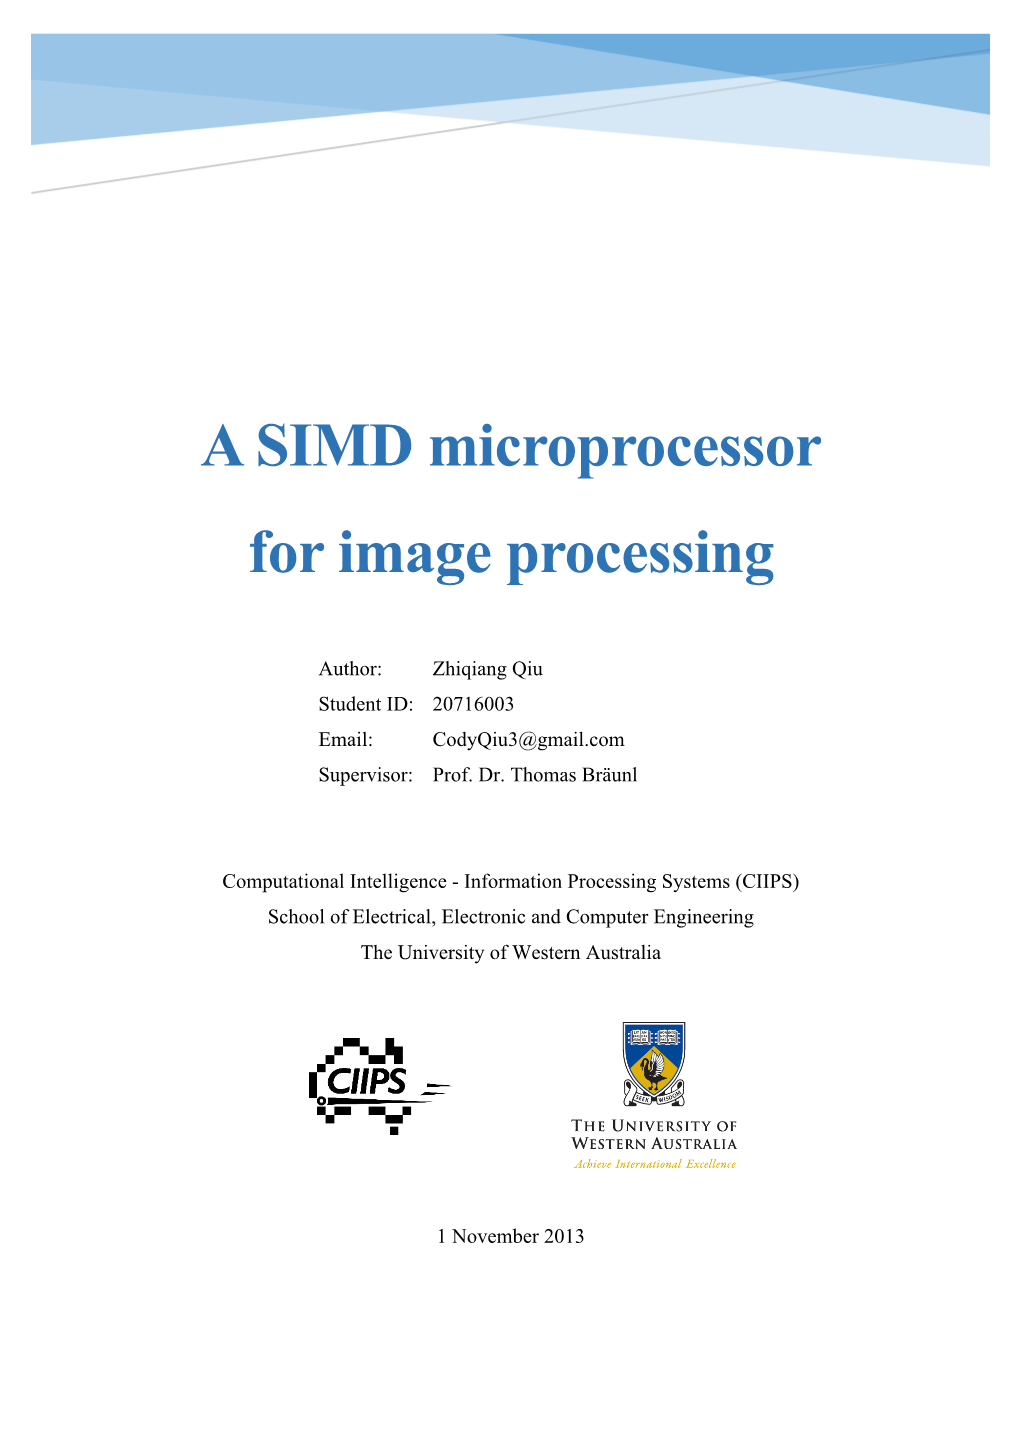 A SIMD Microprocessor for Image Processing